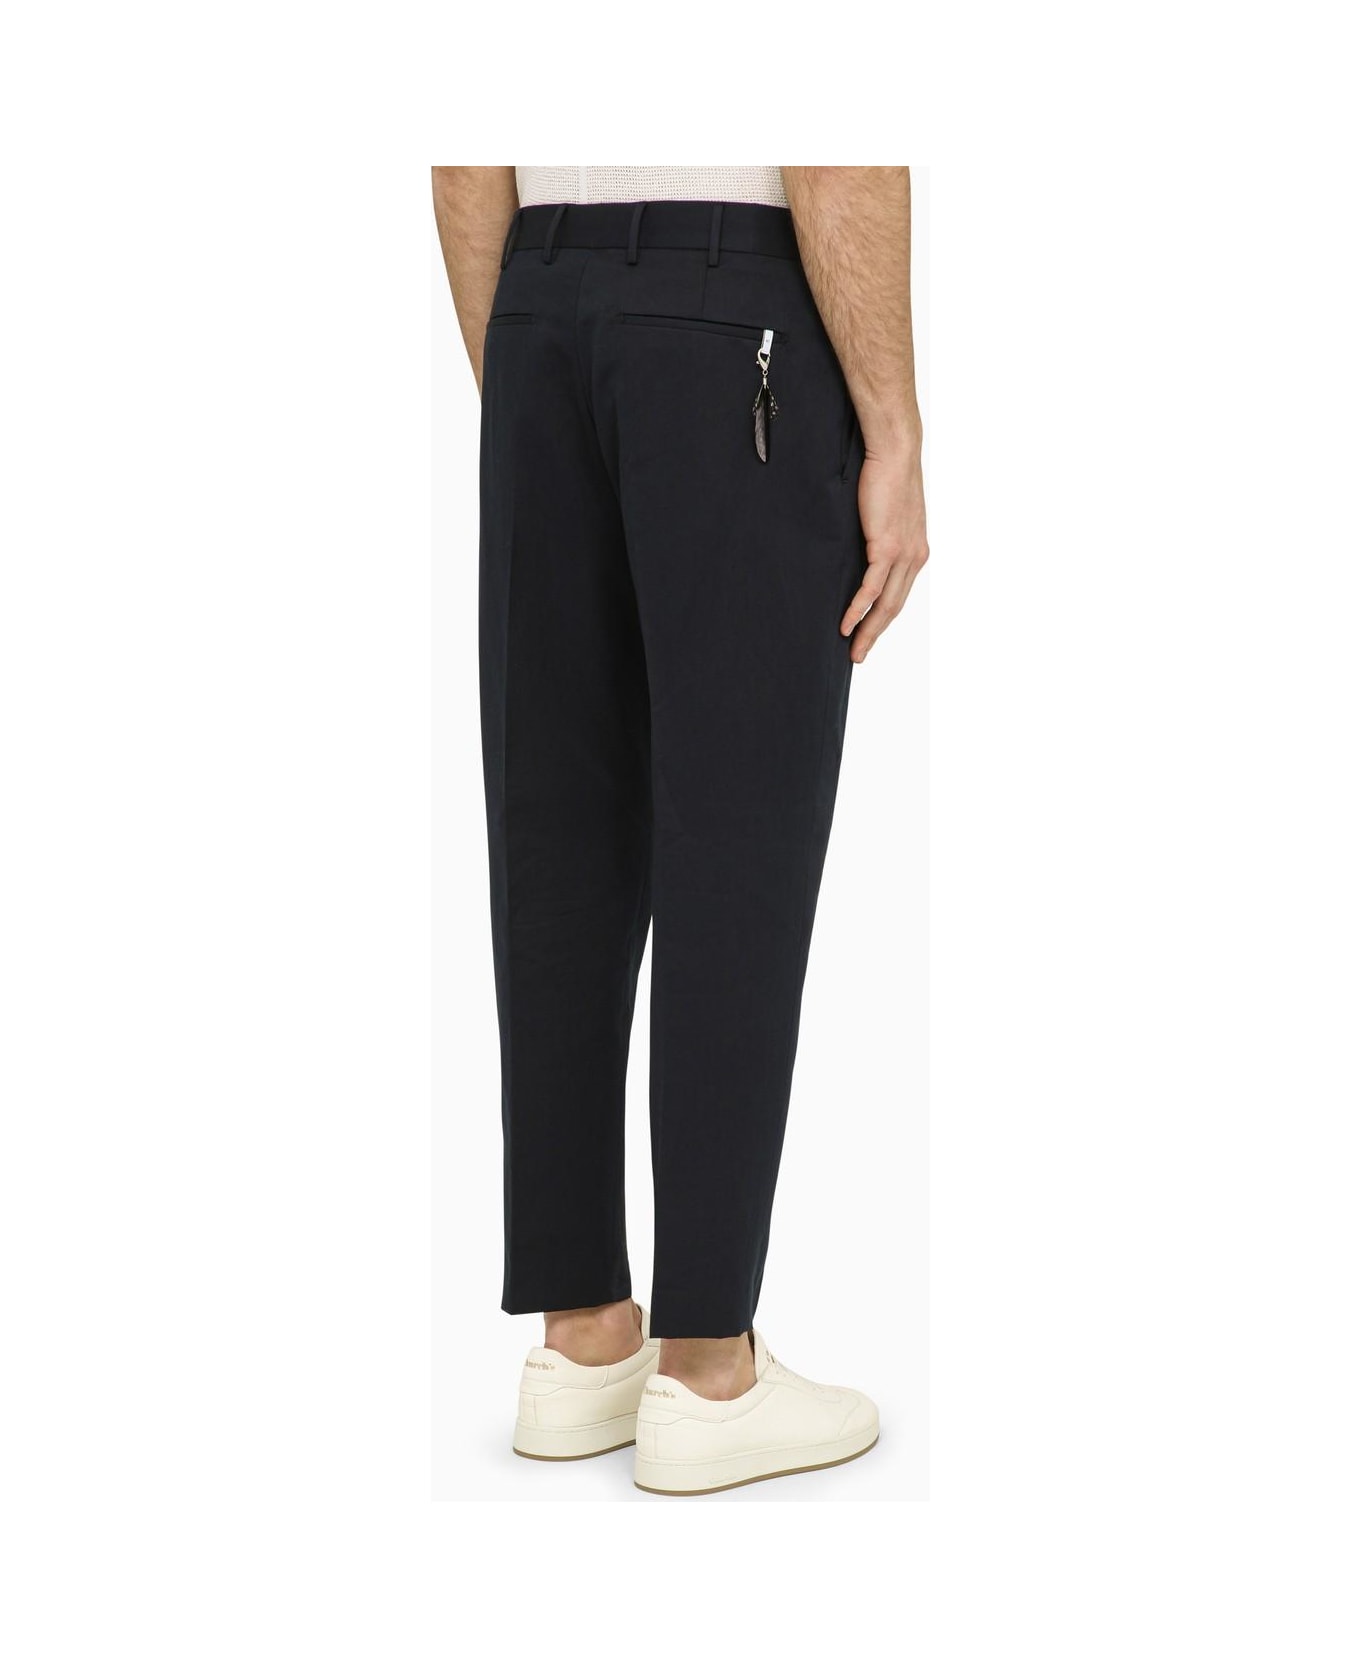 PT Torino Navy Blue Slim Trousers In Cotton And Linen - 0360 BLUE